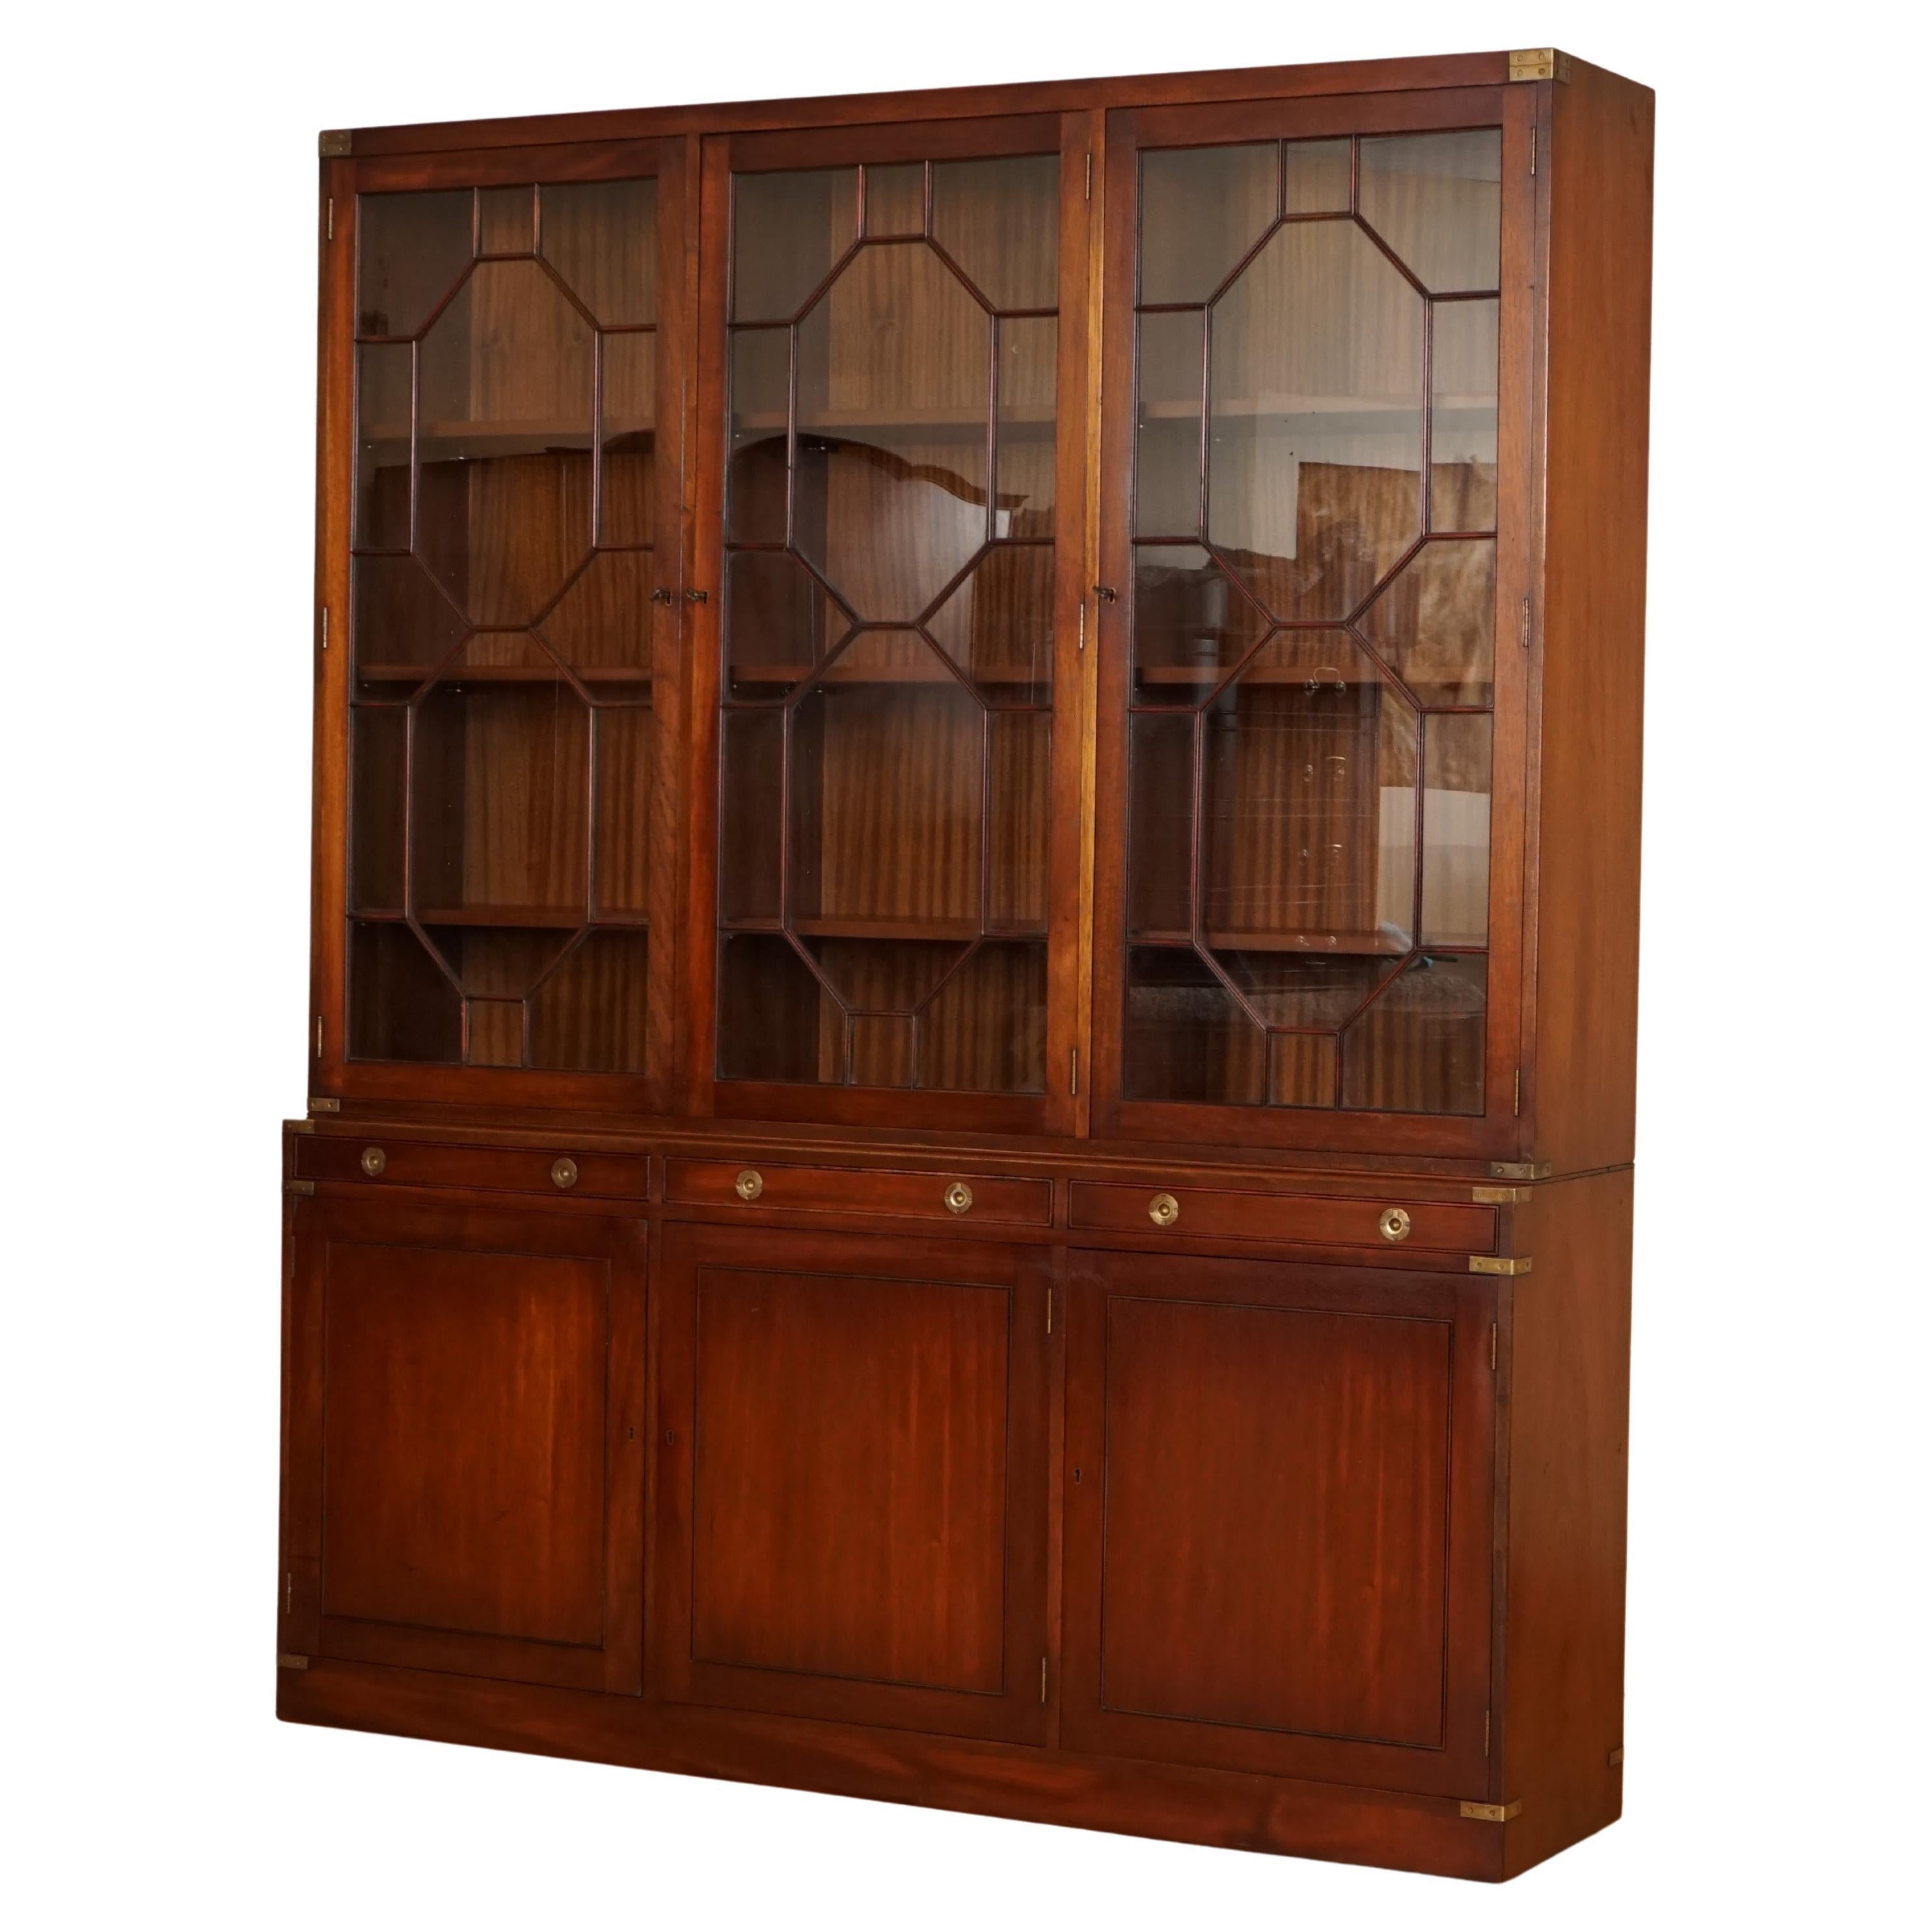 Kennedy for Harrods London Astral Glazed Campaign Library Bookcase Leather 1/2 